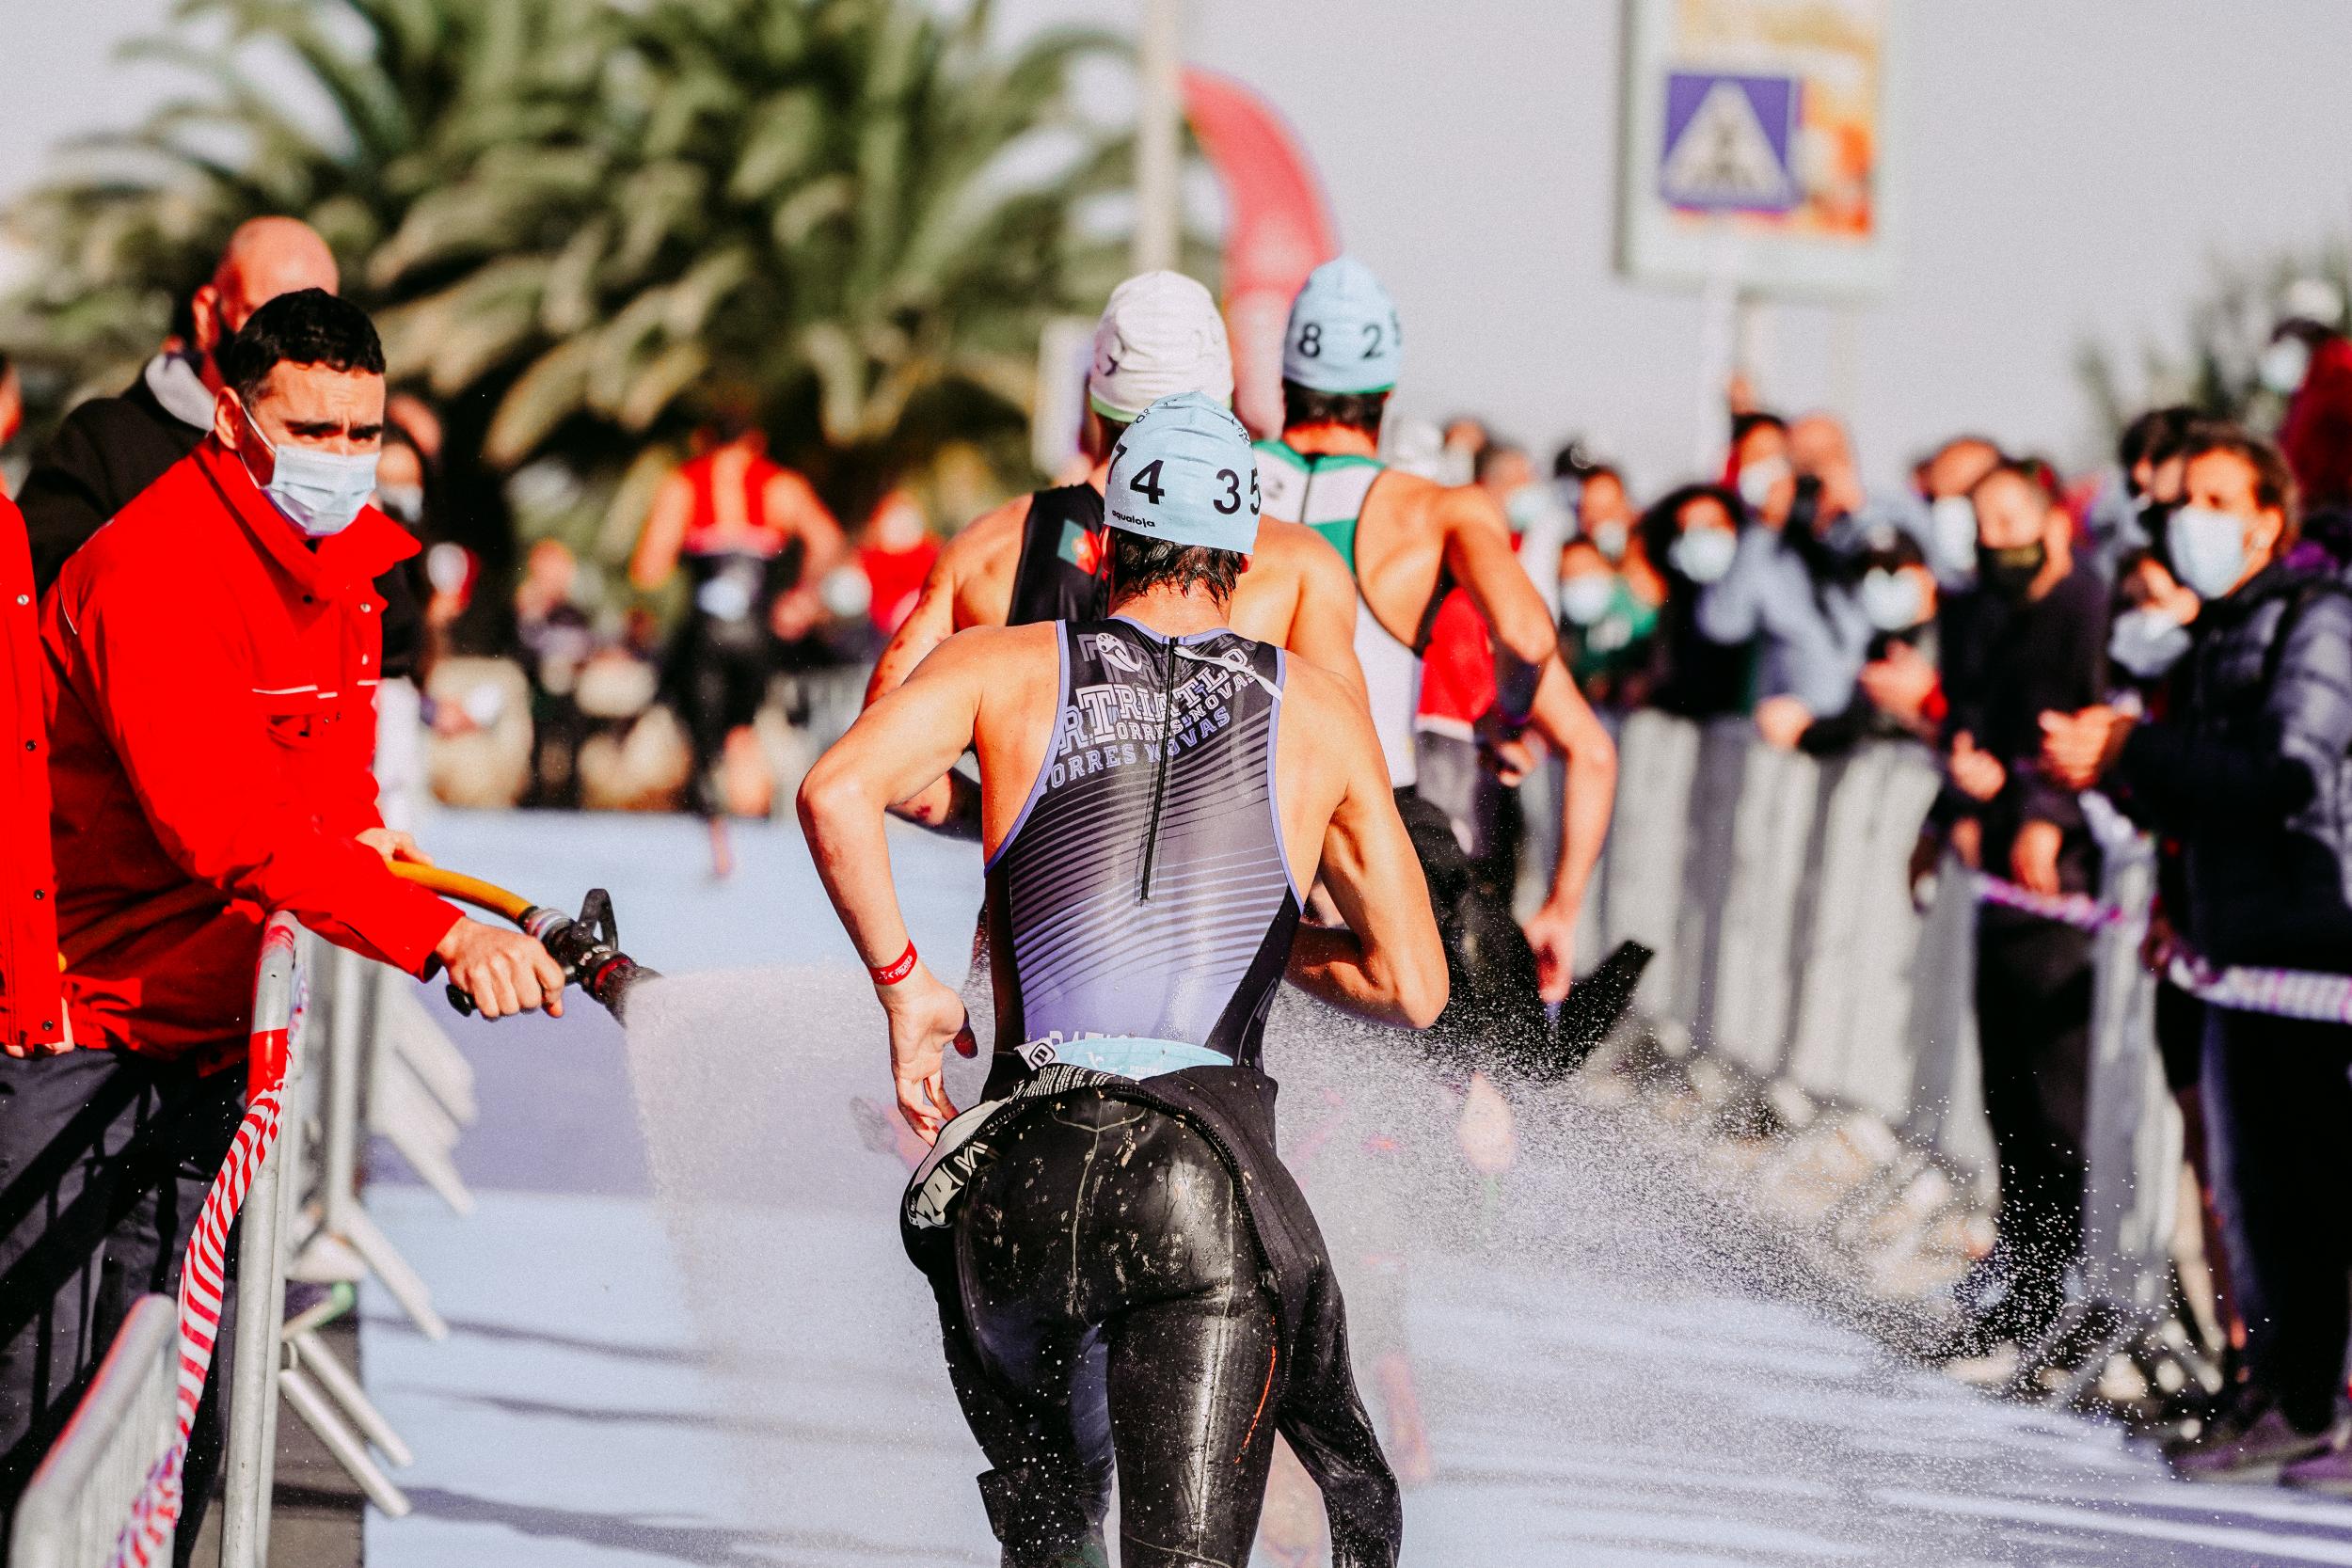 Get The Best Custom Suits By Champion System For Men And Women For USA Triathlons